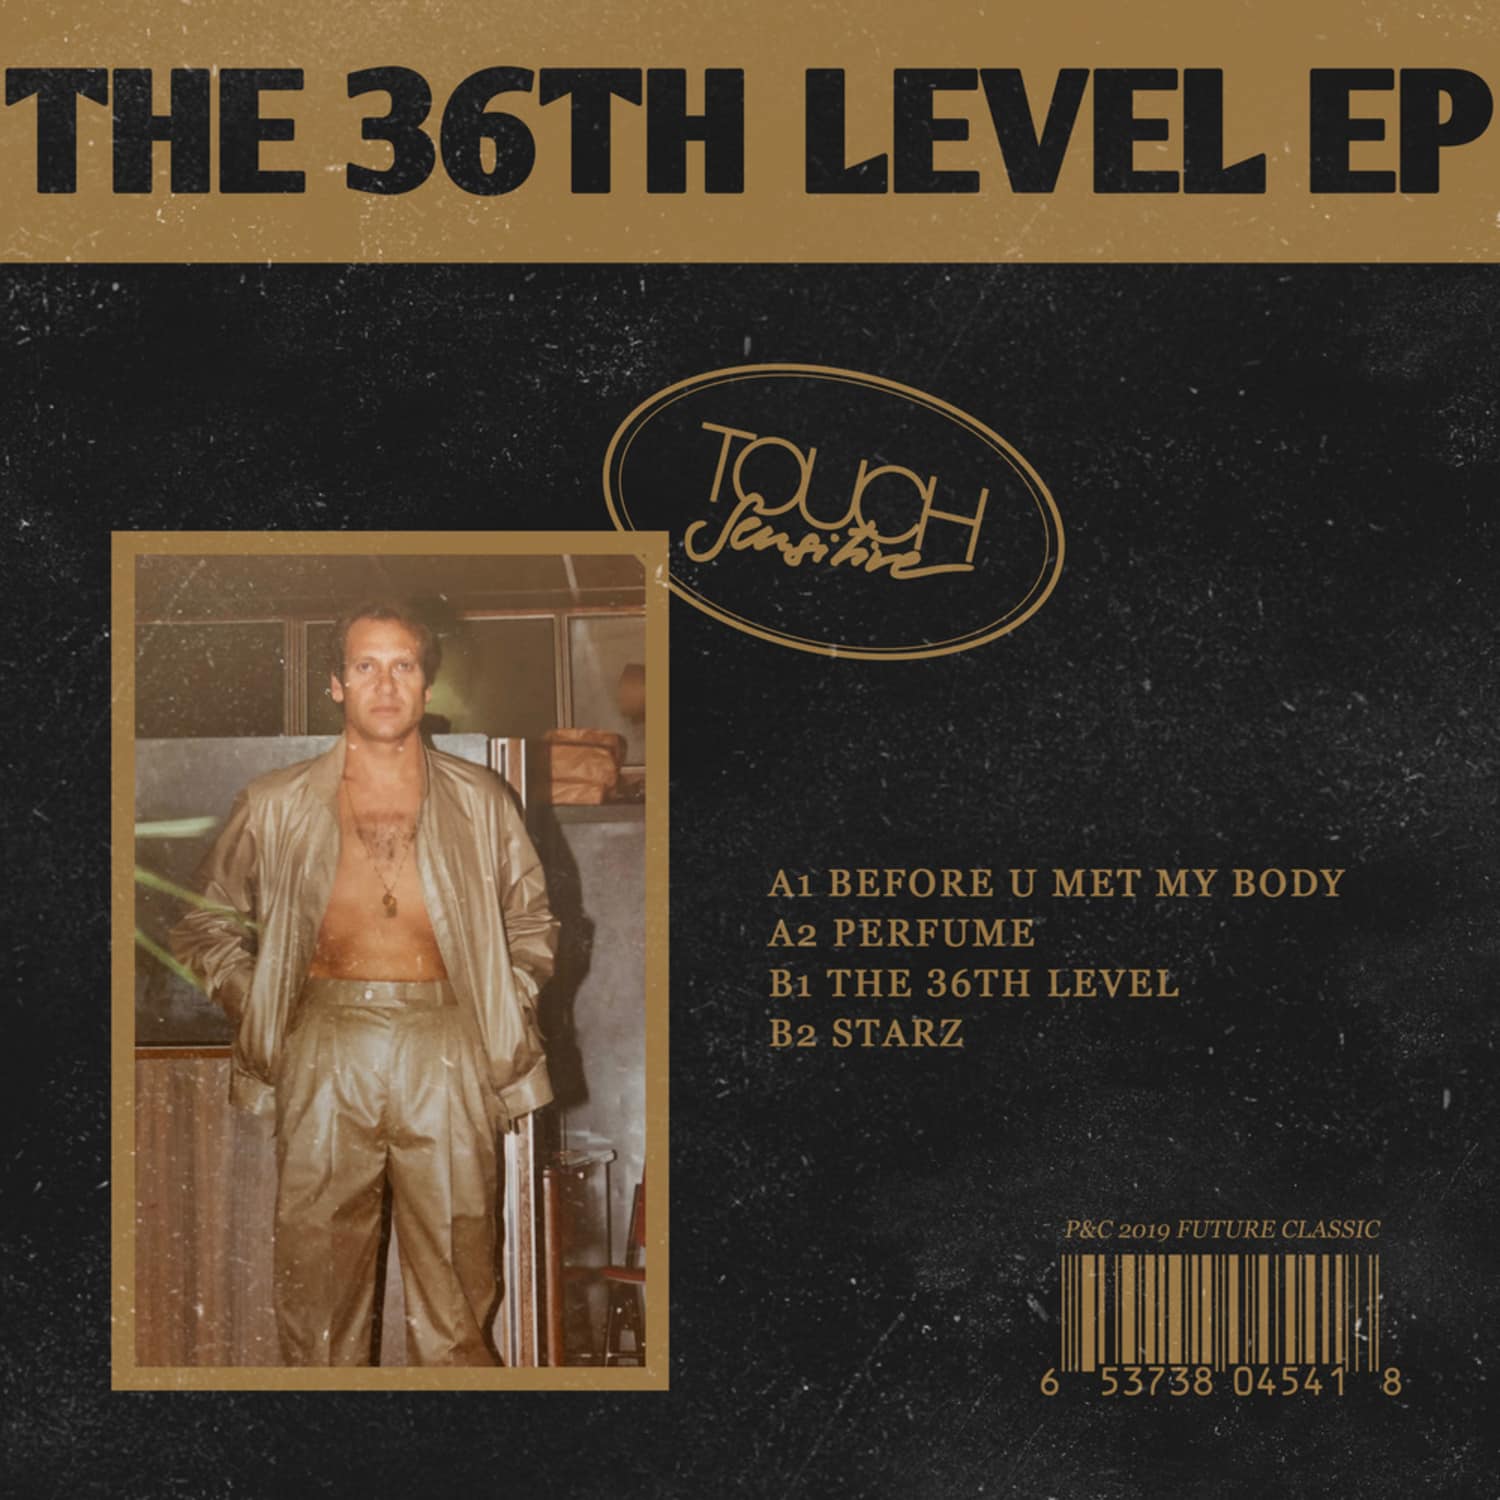 Touch Sensitive - THE 36TH LEVEL EP